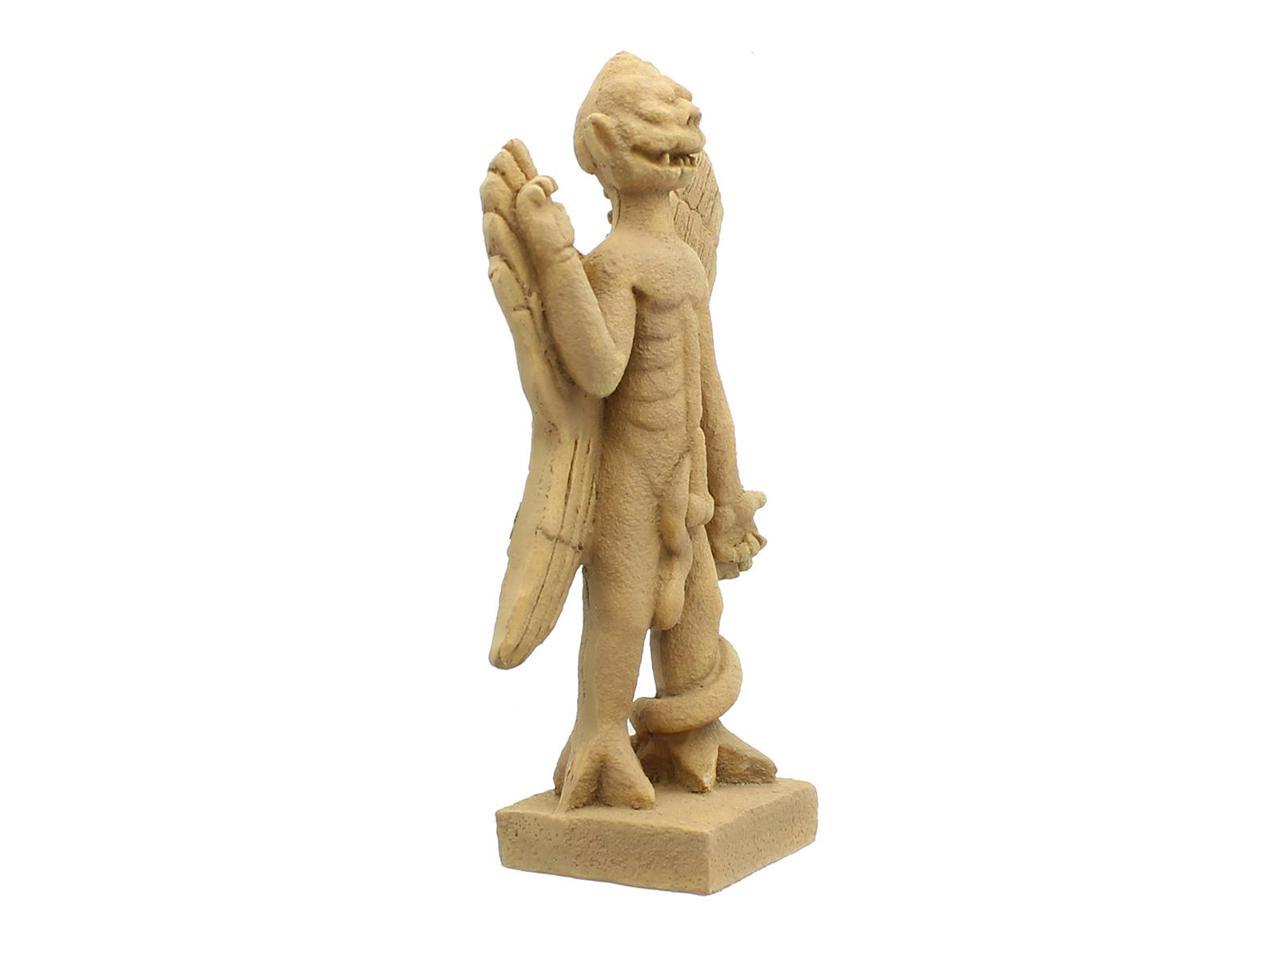 6 Inch Resin Horror Movie Collectible Toynk Pazuzu Statue from The Exorcist Movie Perfect Collectors Item for Exorcist and Horror Movie Fans